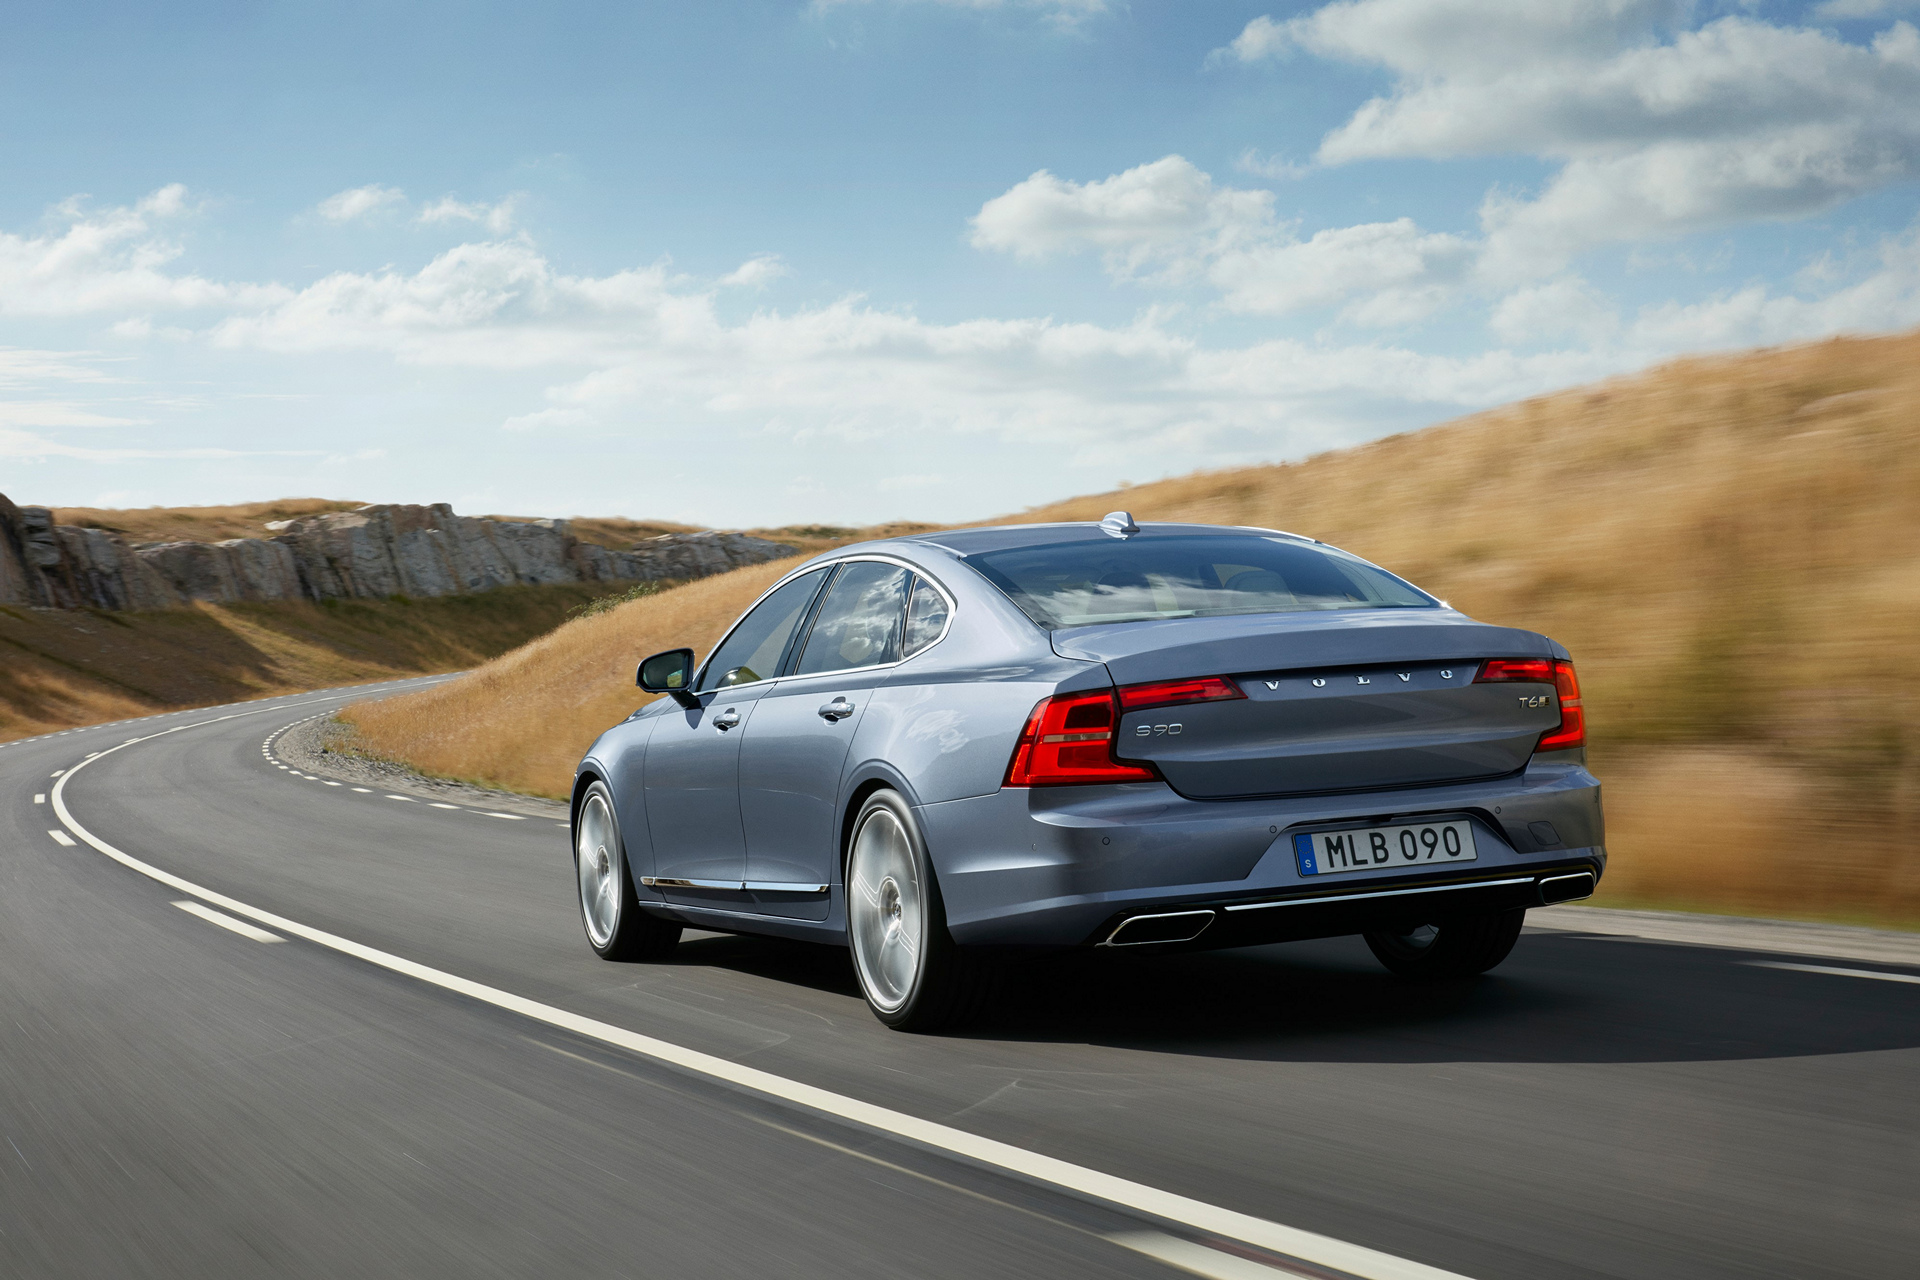 Volvo S90 © Zhejiang Geely Holding Group Co., Ltd